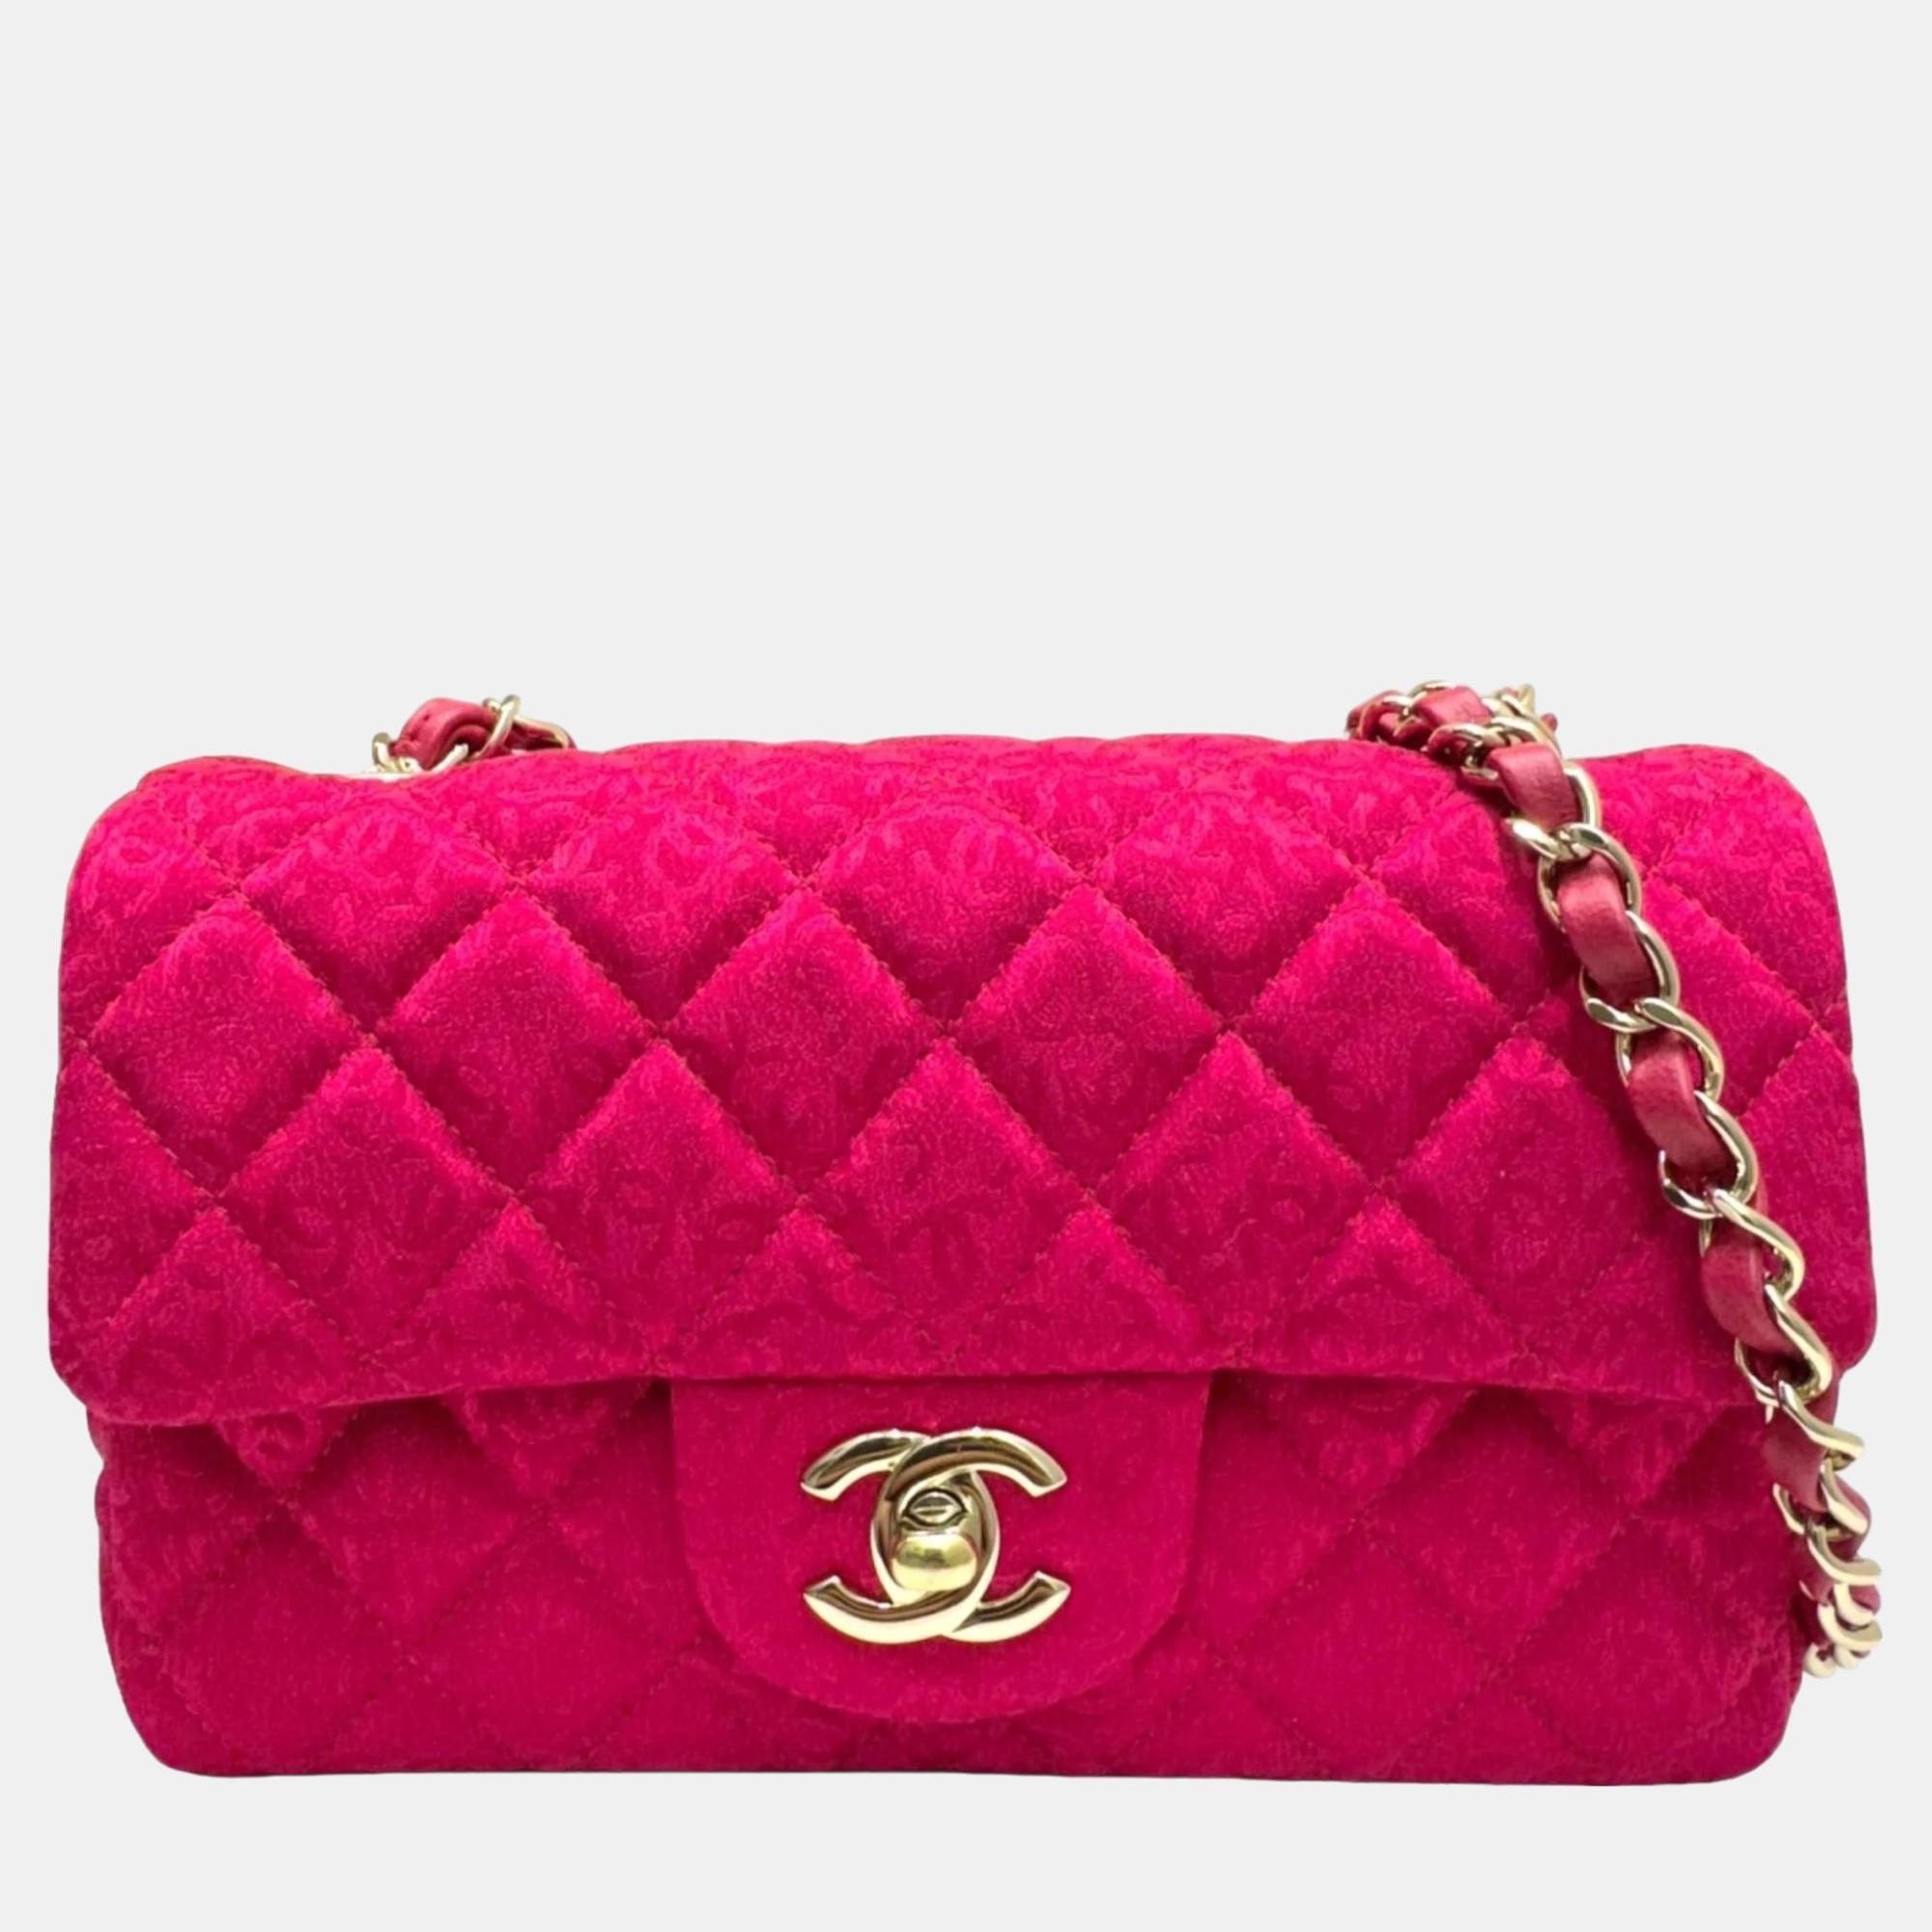 Chanel pink satin synthetic flap bag